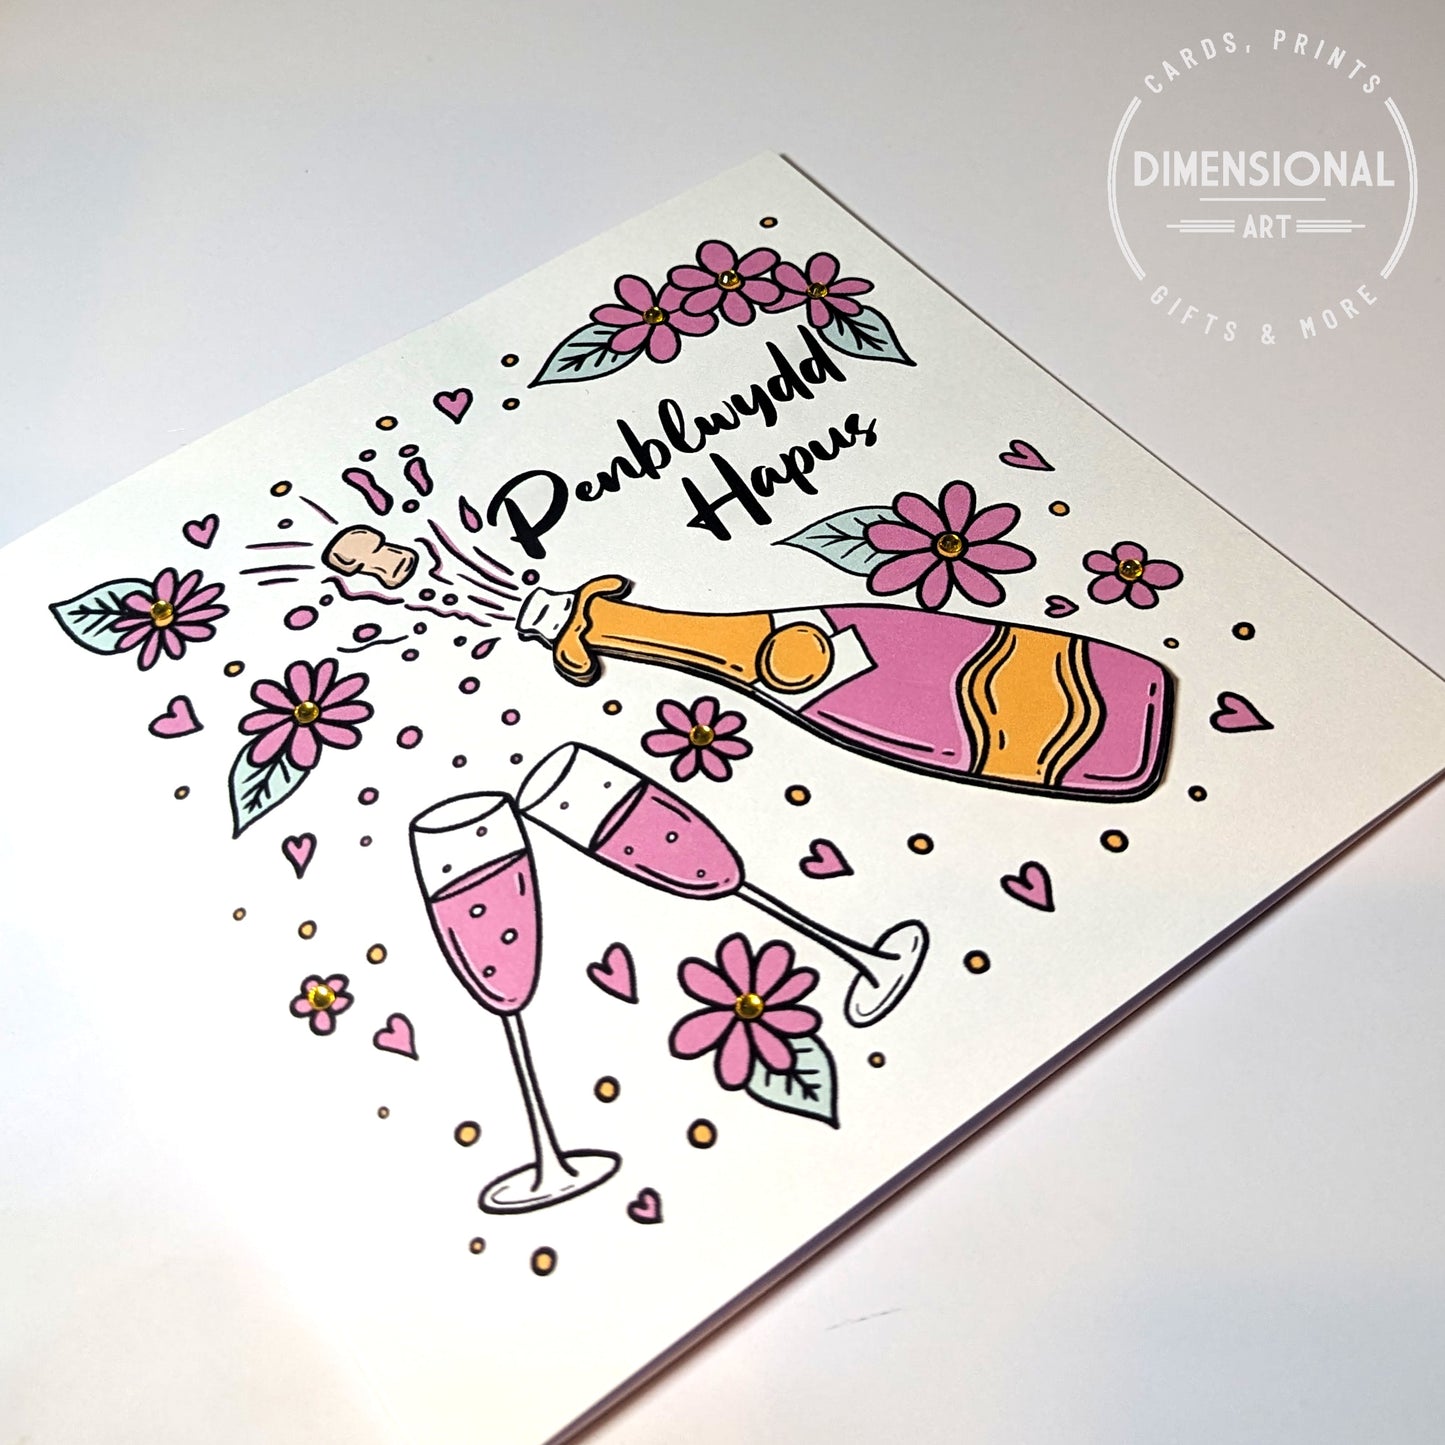 Pink Champagne and Flowers  Penblwydd Hapus (Birthday Card) - Welsh Card